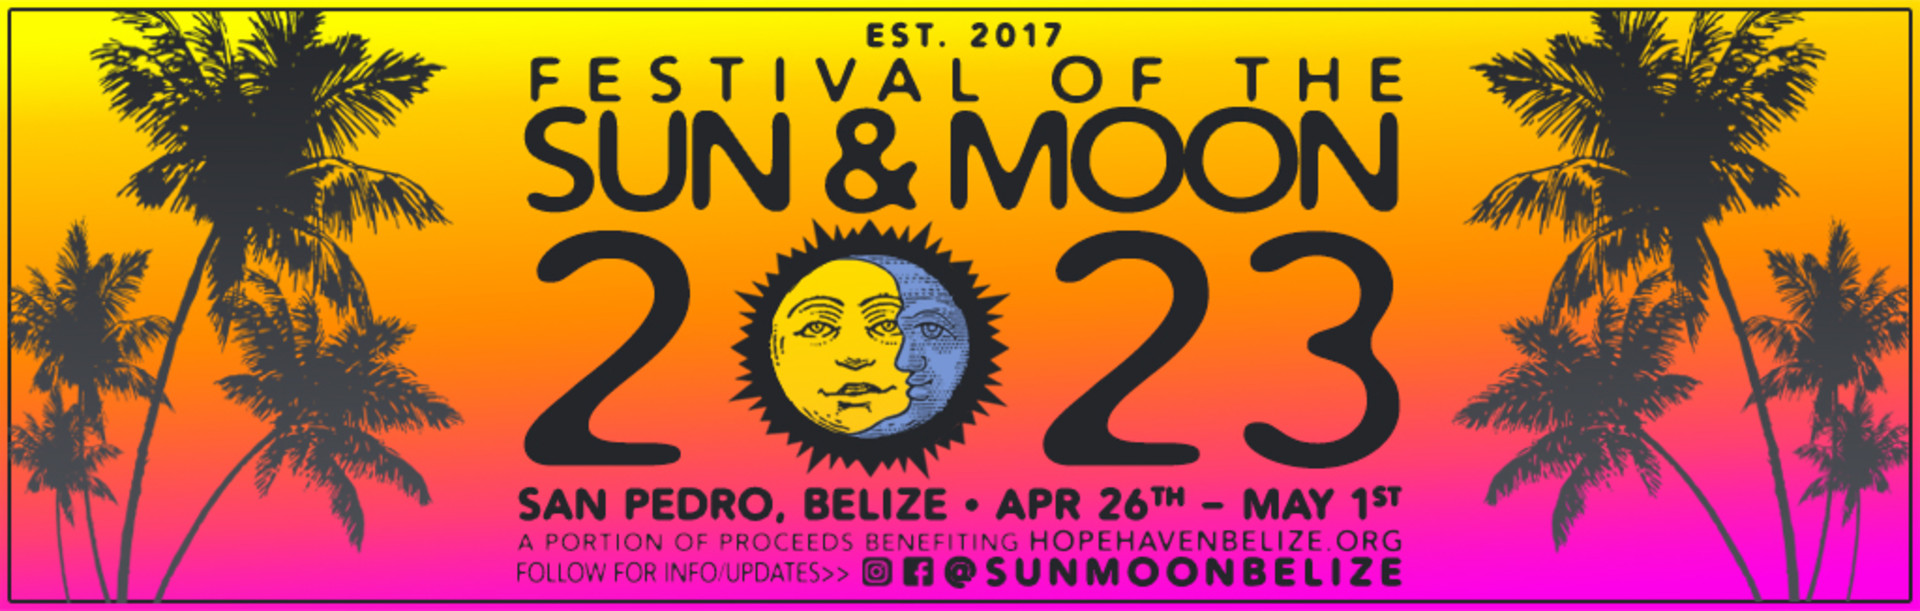 Buy tickets – Festival of the Sun & Moon 2023 – San Pedro, Belize, Wed Apr  26, 2023 4:45 PM - Mon May 1, 2023 6:00 PM